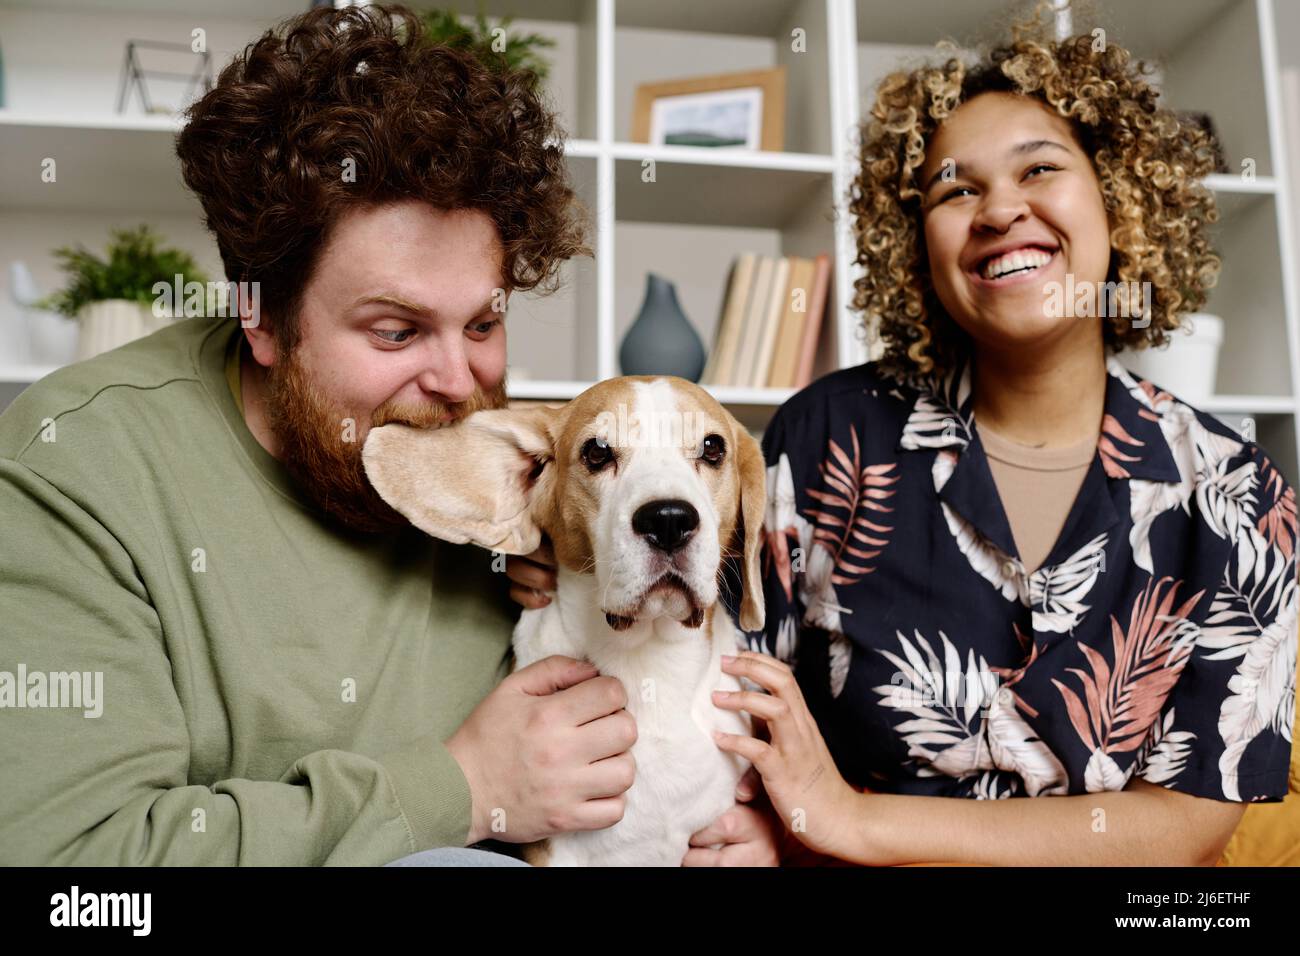 African young woman laughing at man who fooling around with their dog, they sitting in living room Stock Photo